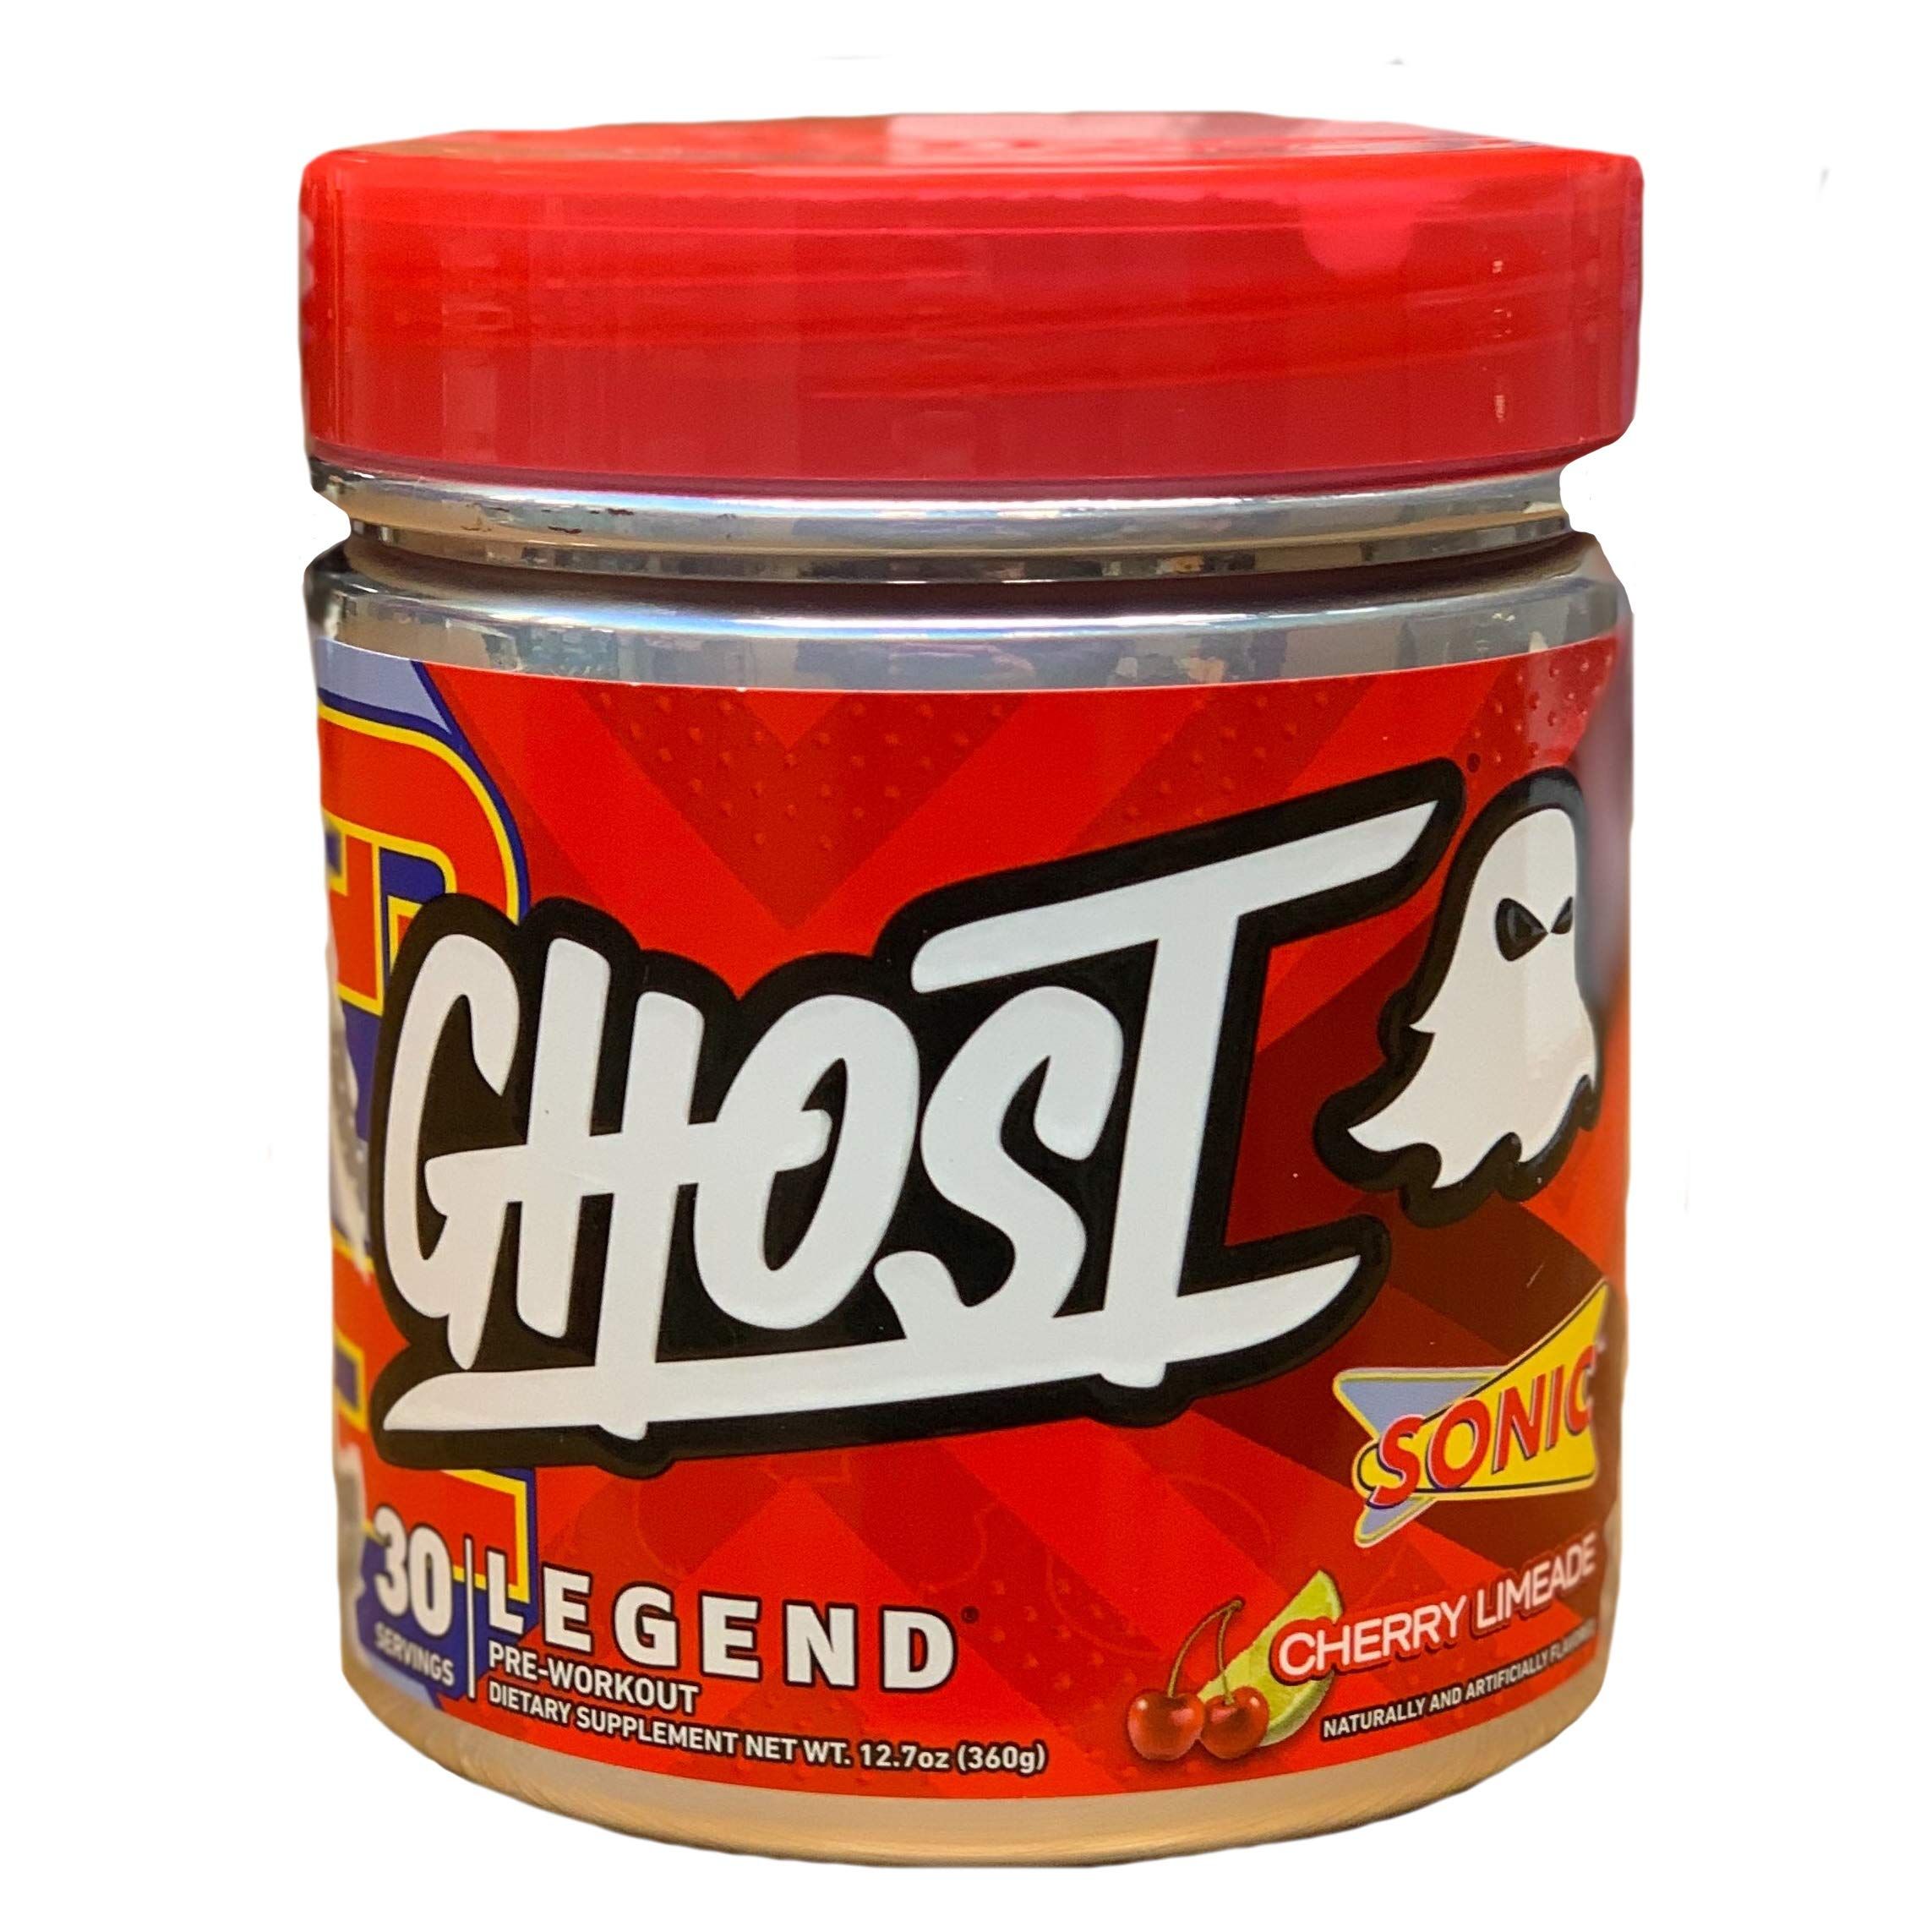 GHOST Legend 30 Servings Pre-Workout Supplement (Sonic Cherry Limeade, 1 Container) | Amazon (US)